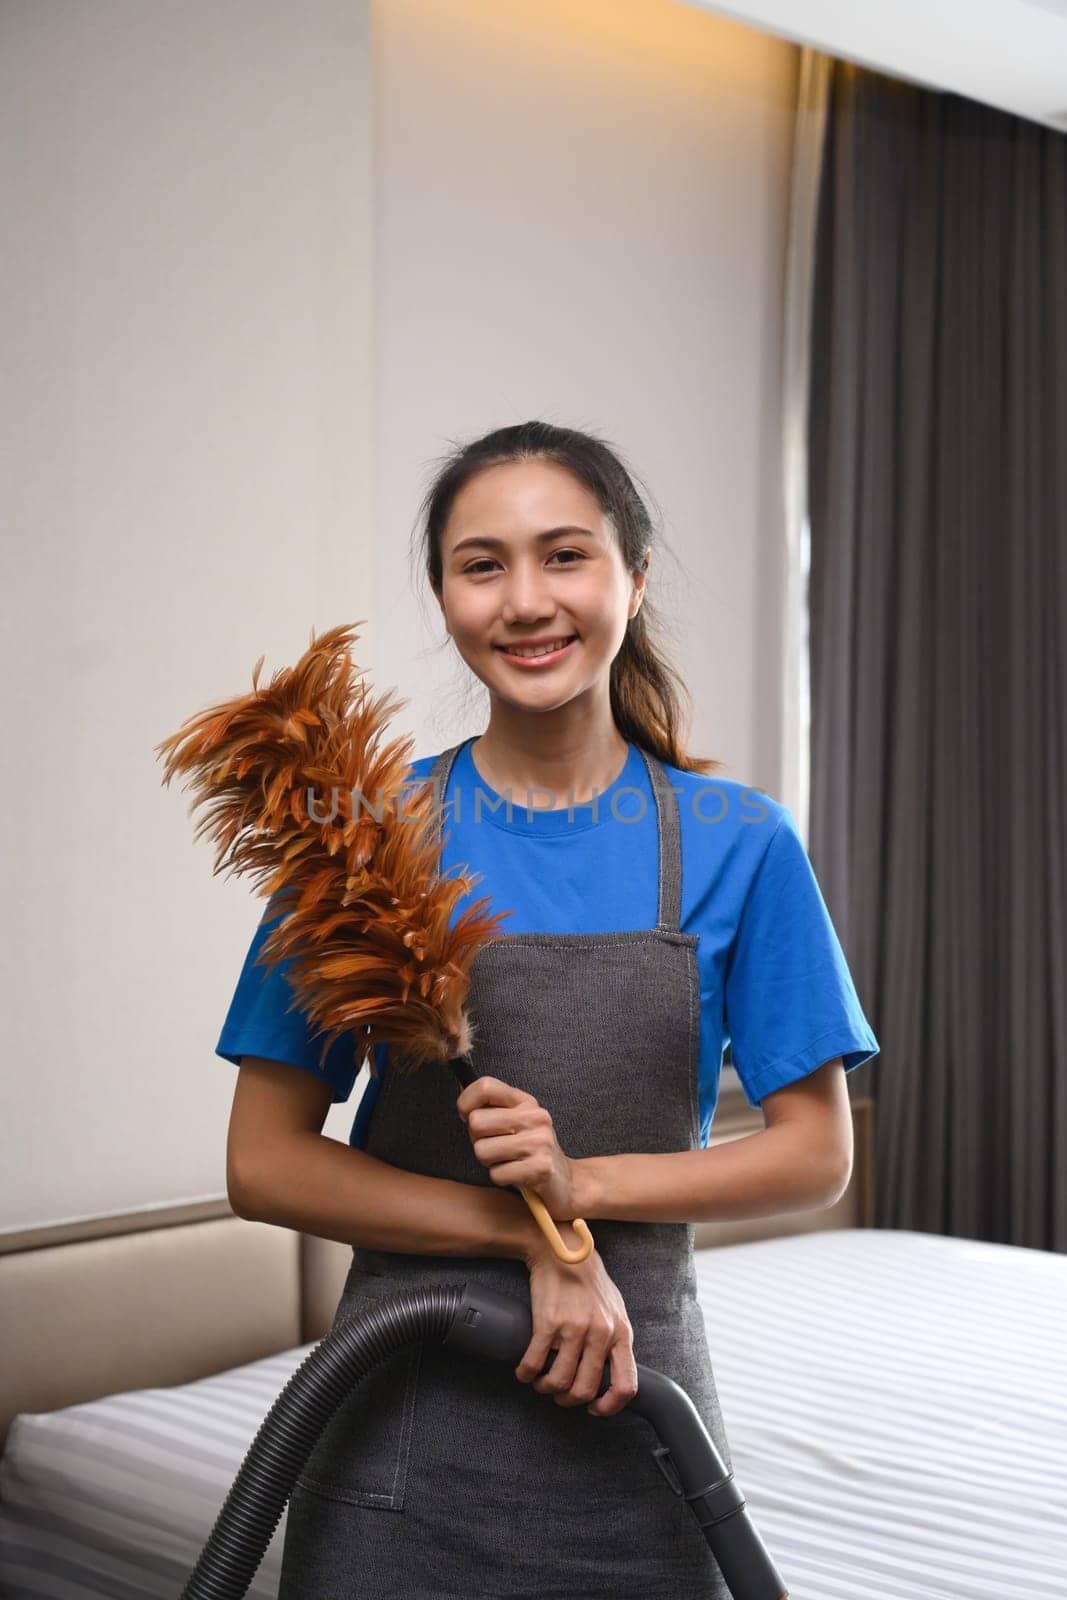 Portrait of female cleaning service worker holding duster and looking at camera.